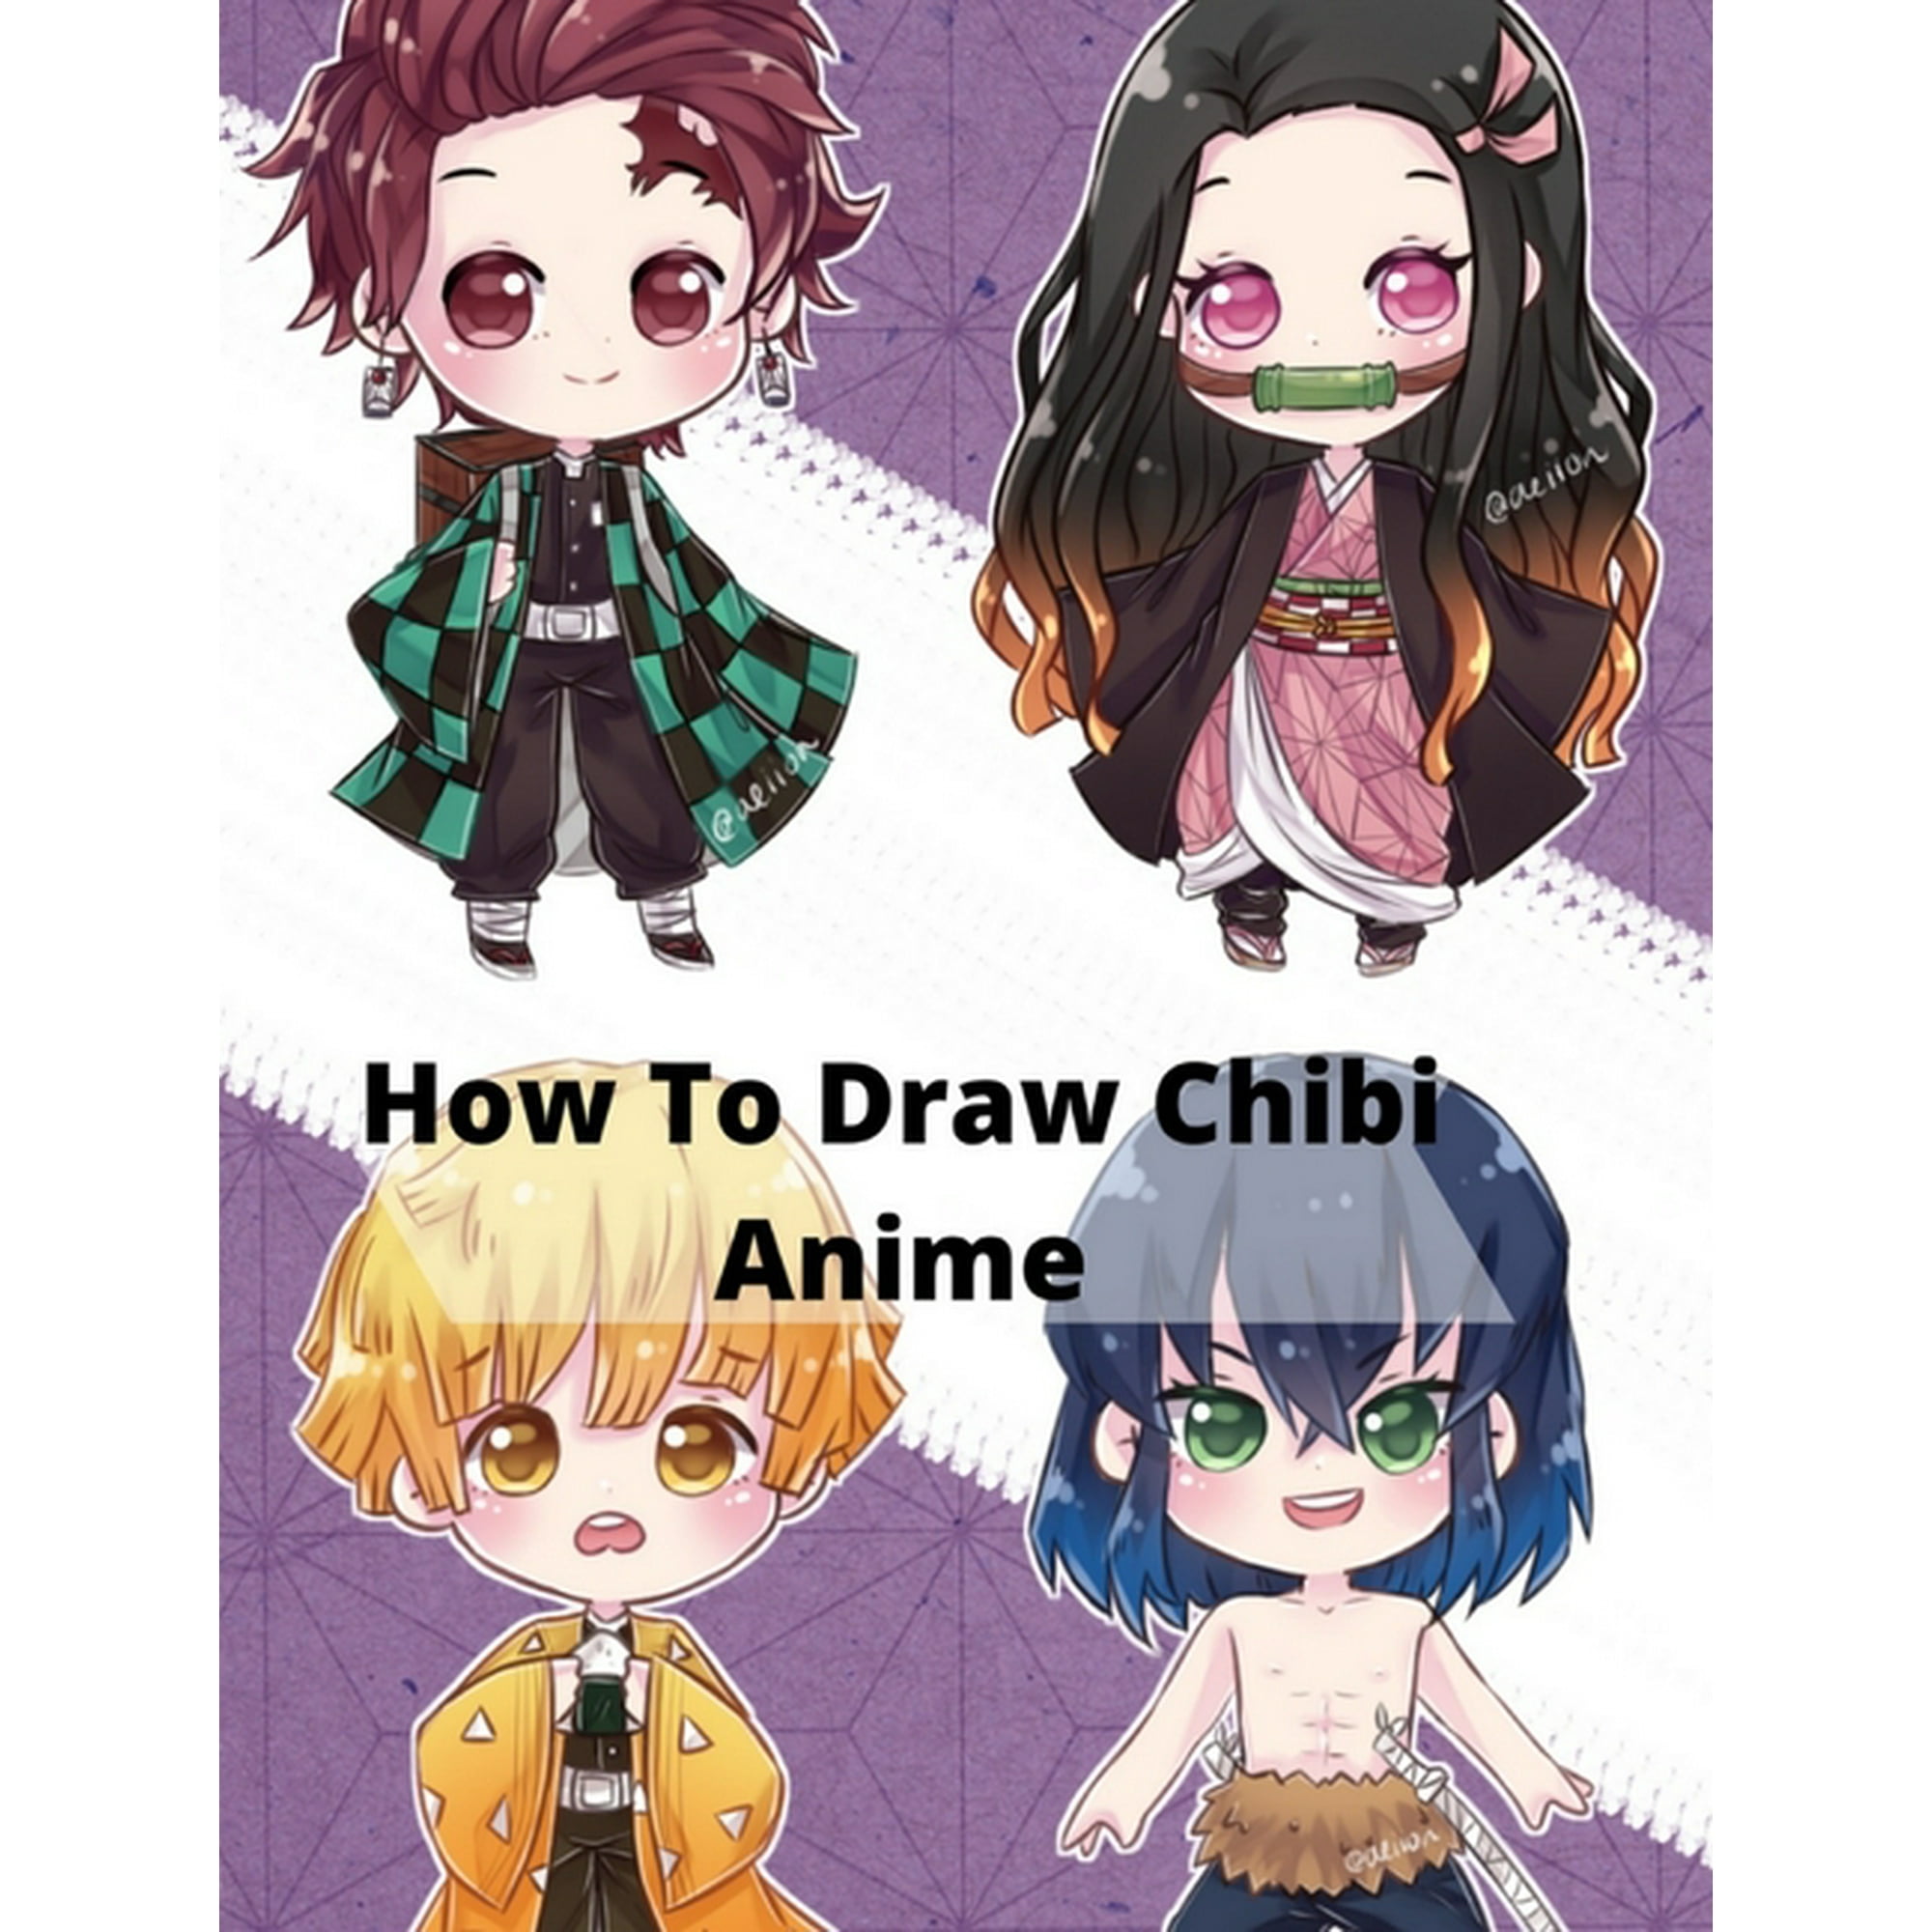 how to draw anime chibi characters